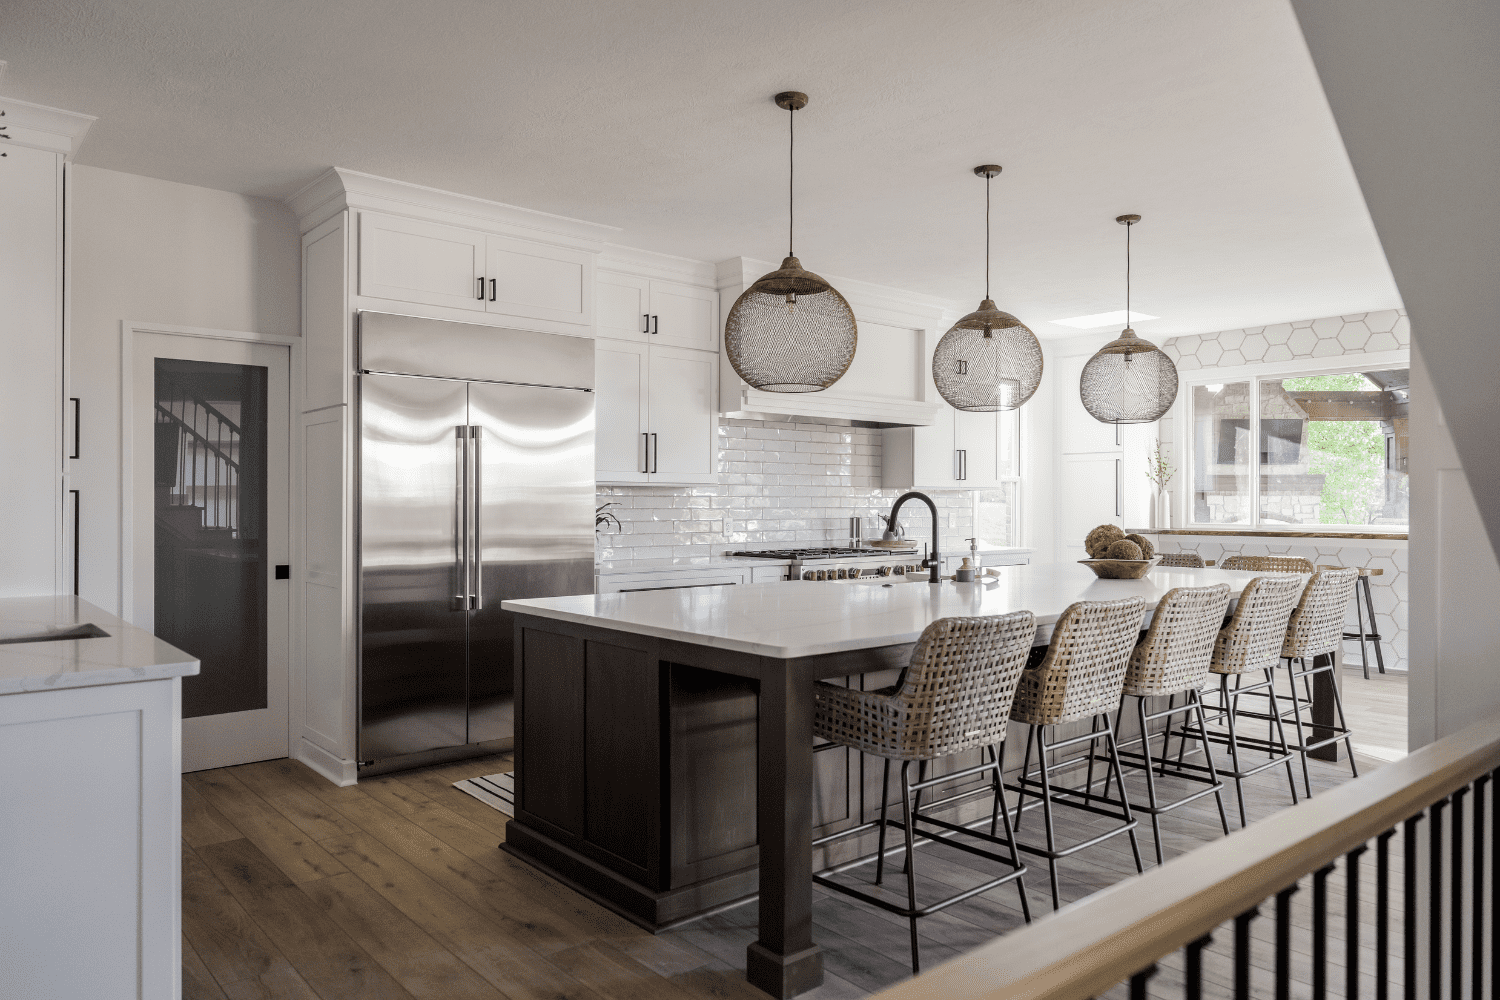 Nicholas Design Build | A kitchen with a large island and bar stools.